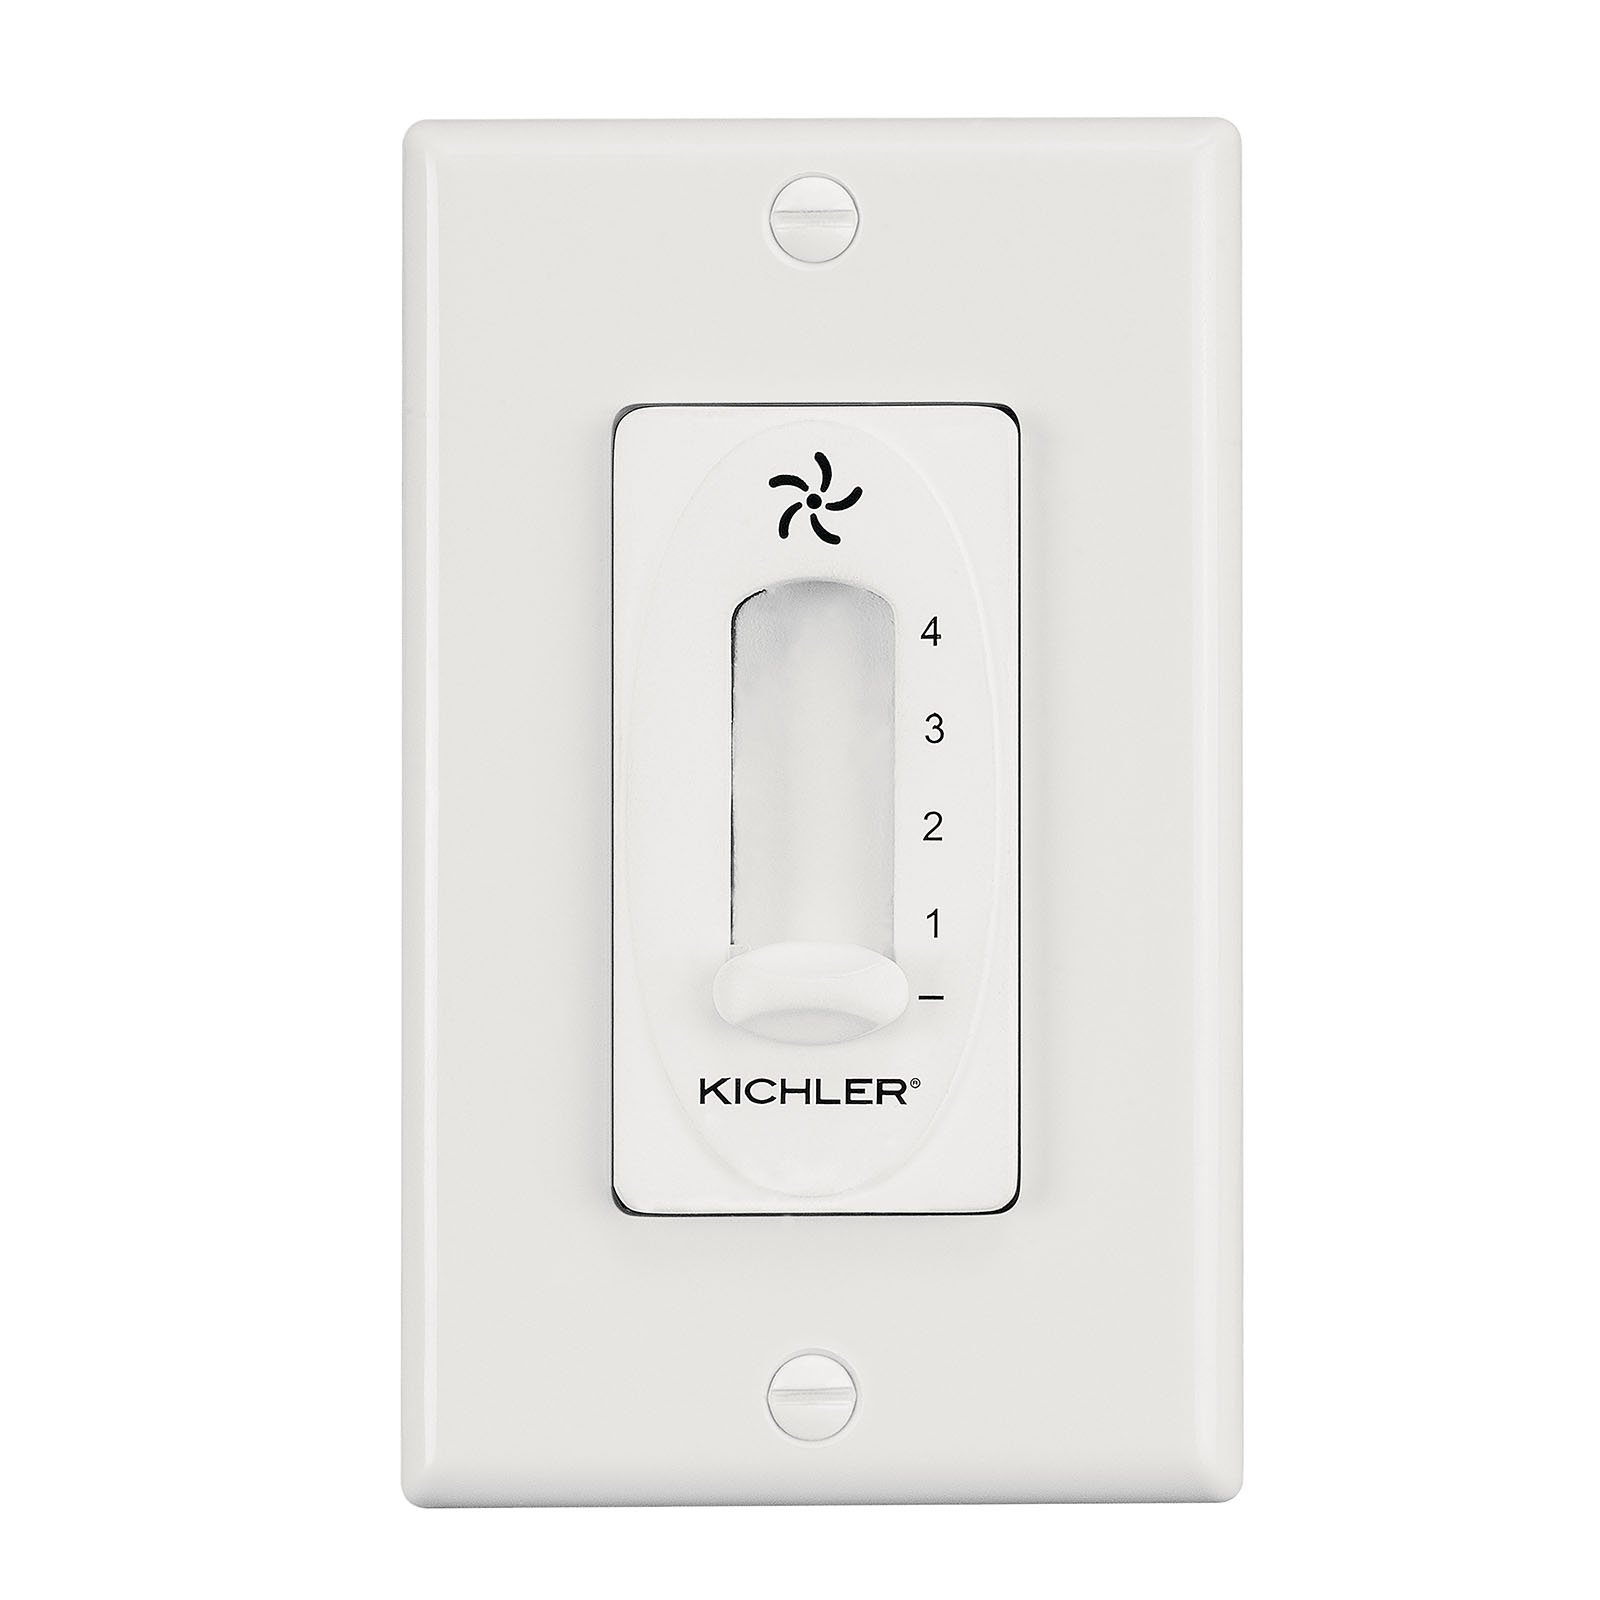 A lighting support necessity, this 4 speed fan slide control features a classic White finish.